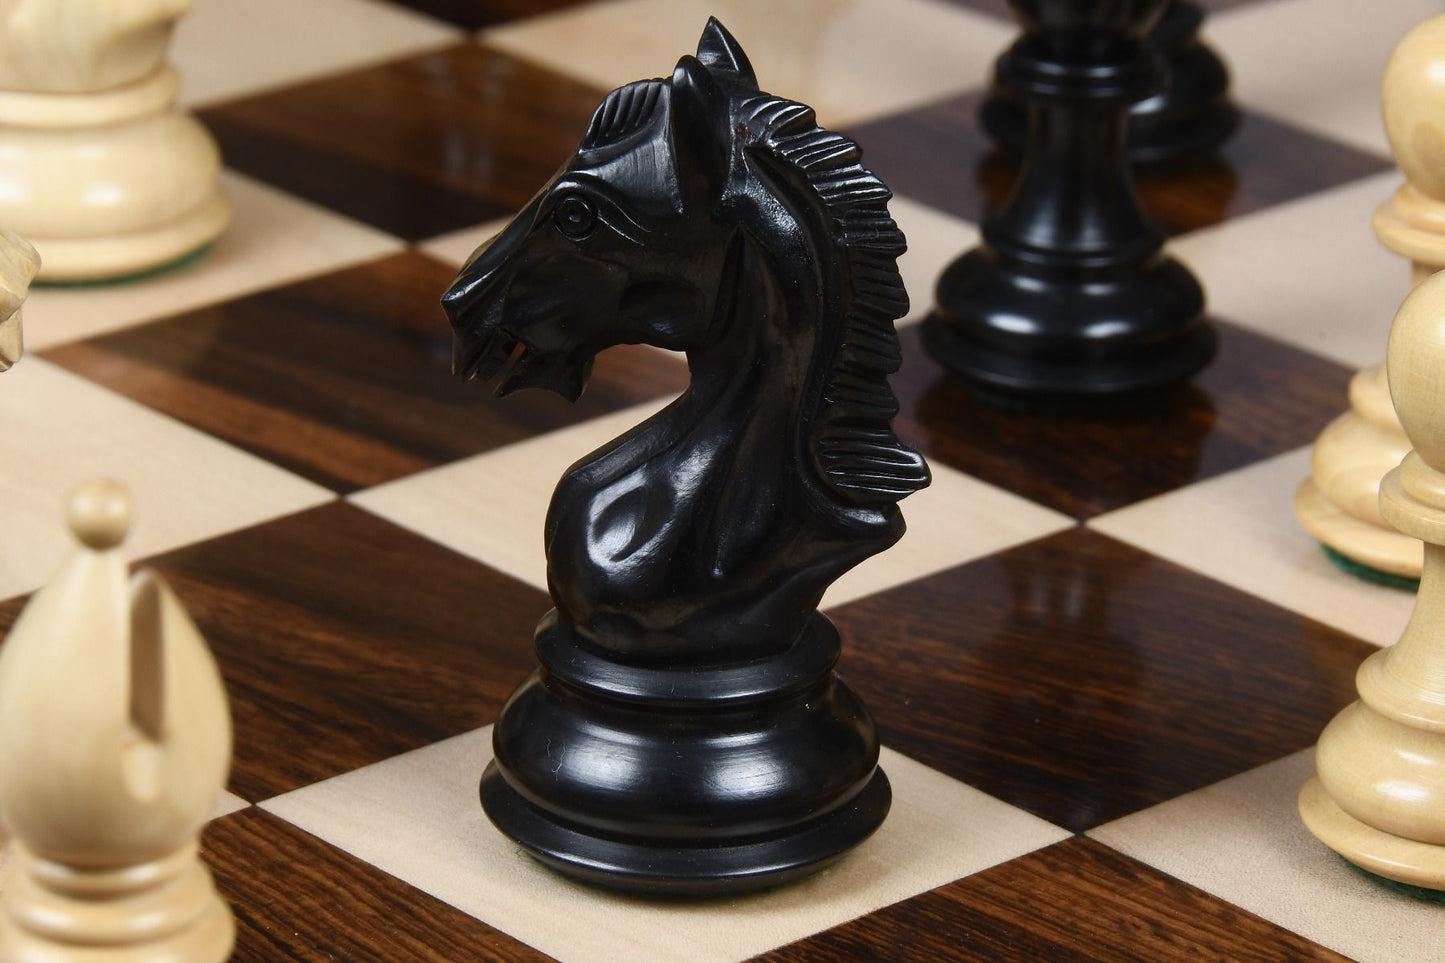 Derby Knight Chessmen in Ebonized Wood- 4.1" King with 21" Notation Board